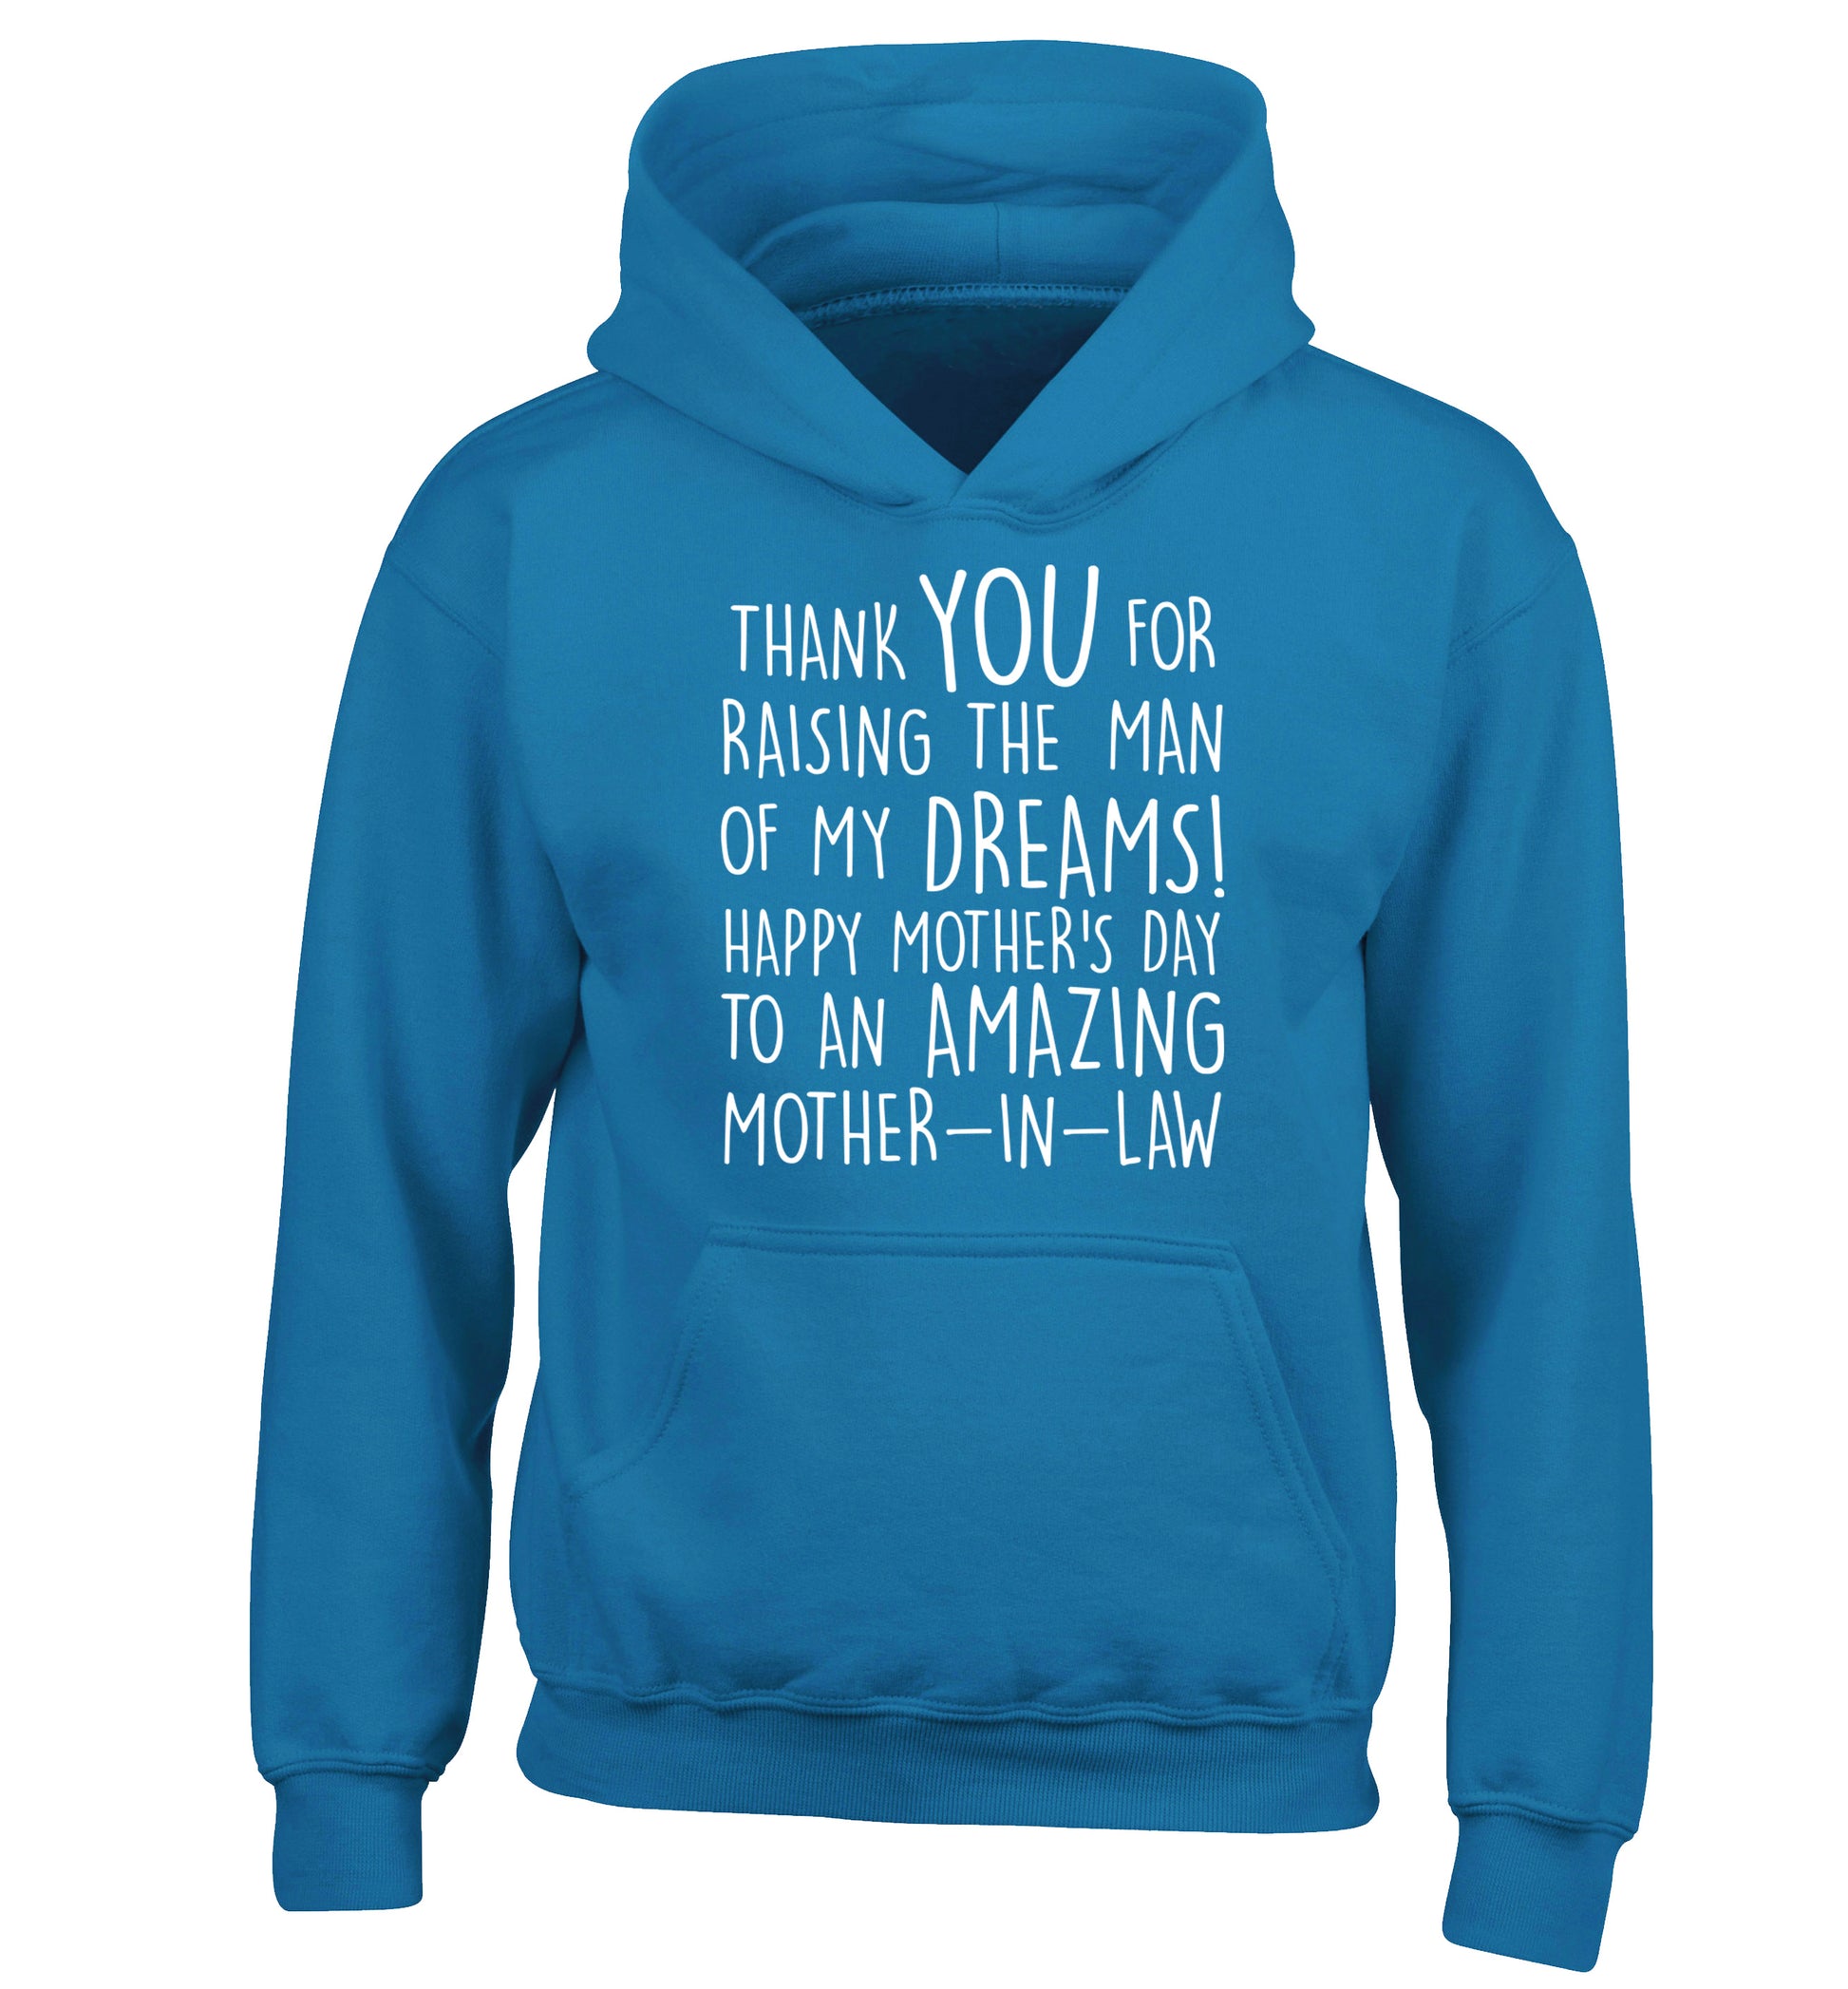 Thank you for raising the man of my dreams happy mother's day mother-in-law children's blue hoodie 12-13 Years